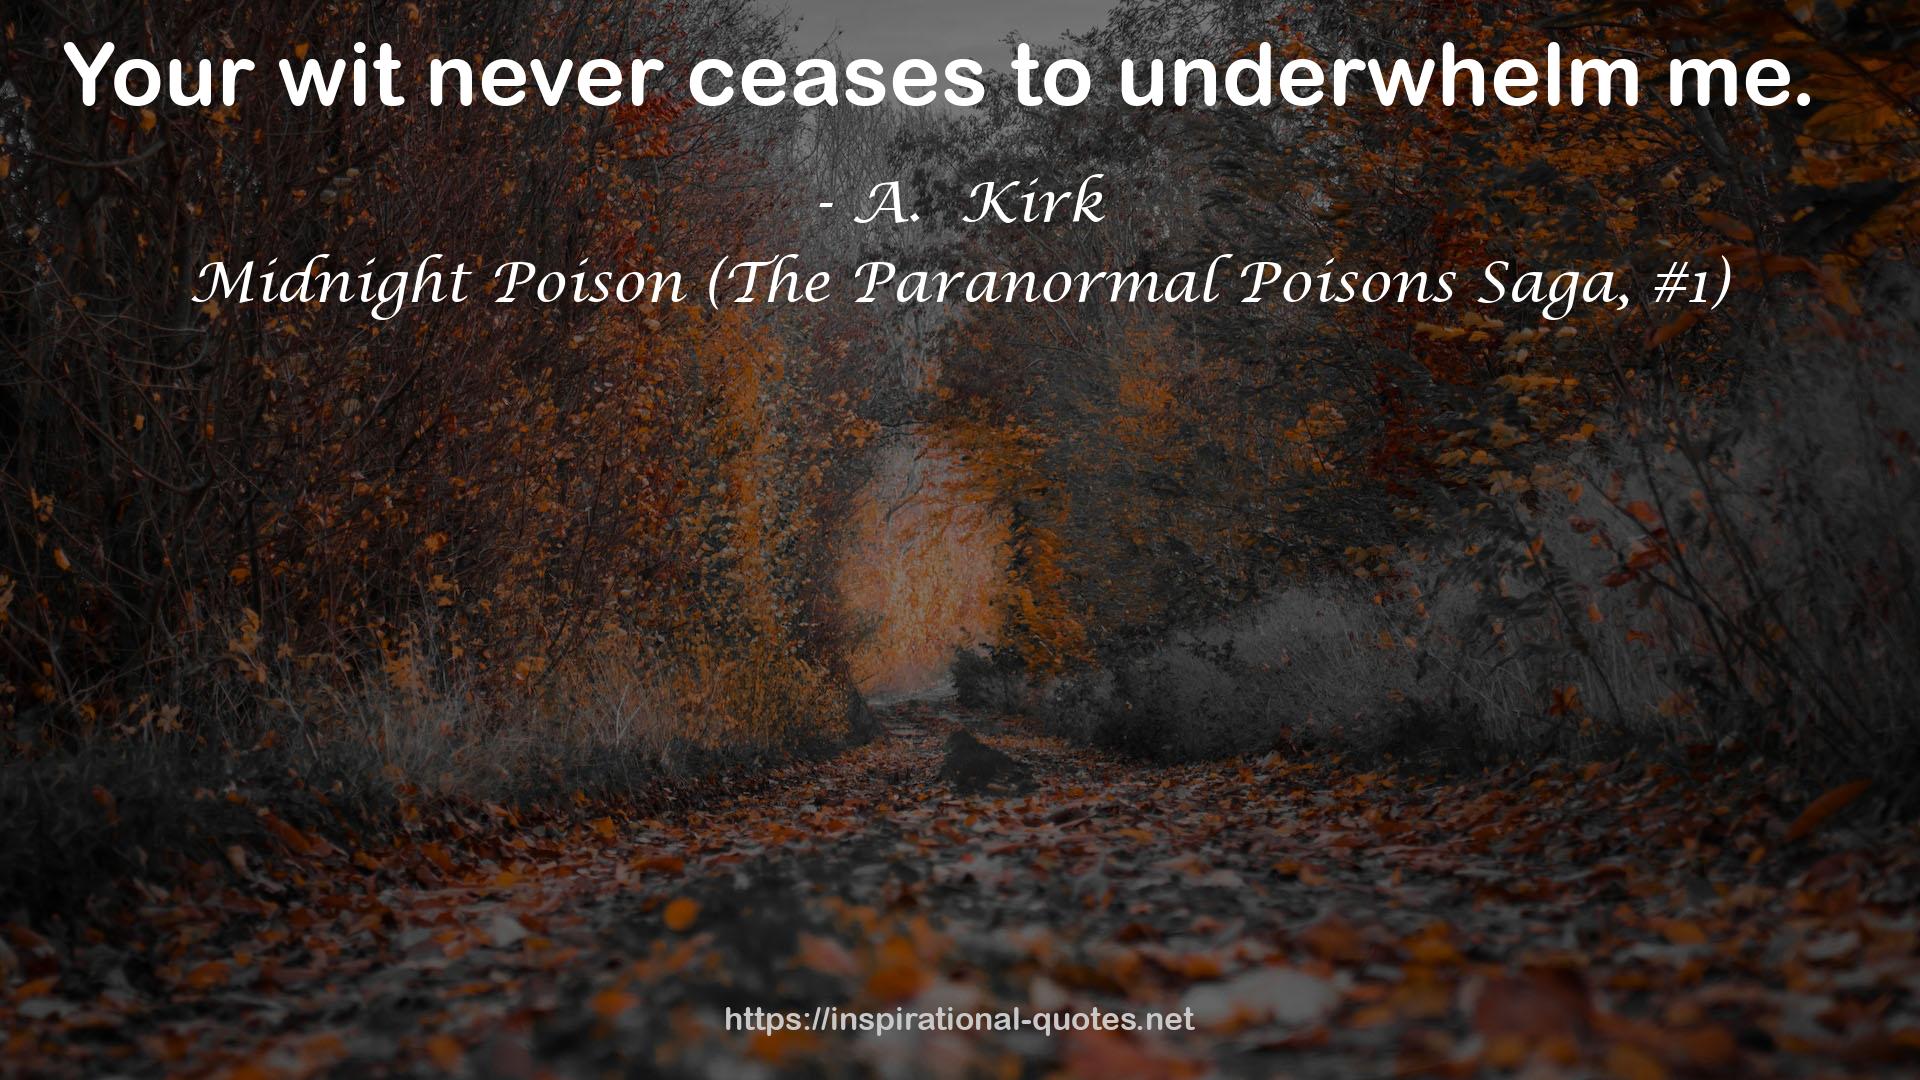 Midnight Poison (The Paranormal Poisons Saga, #1) QUOTES